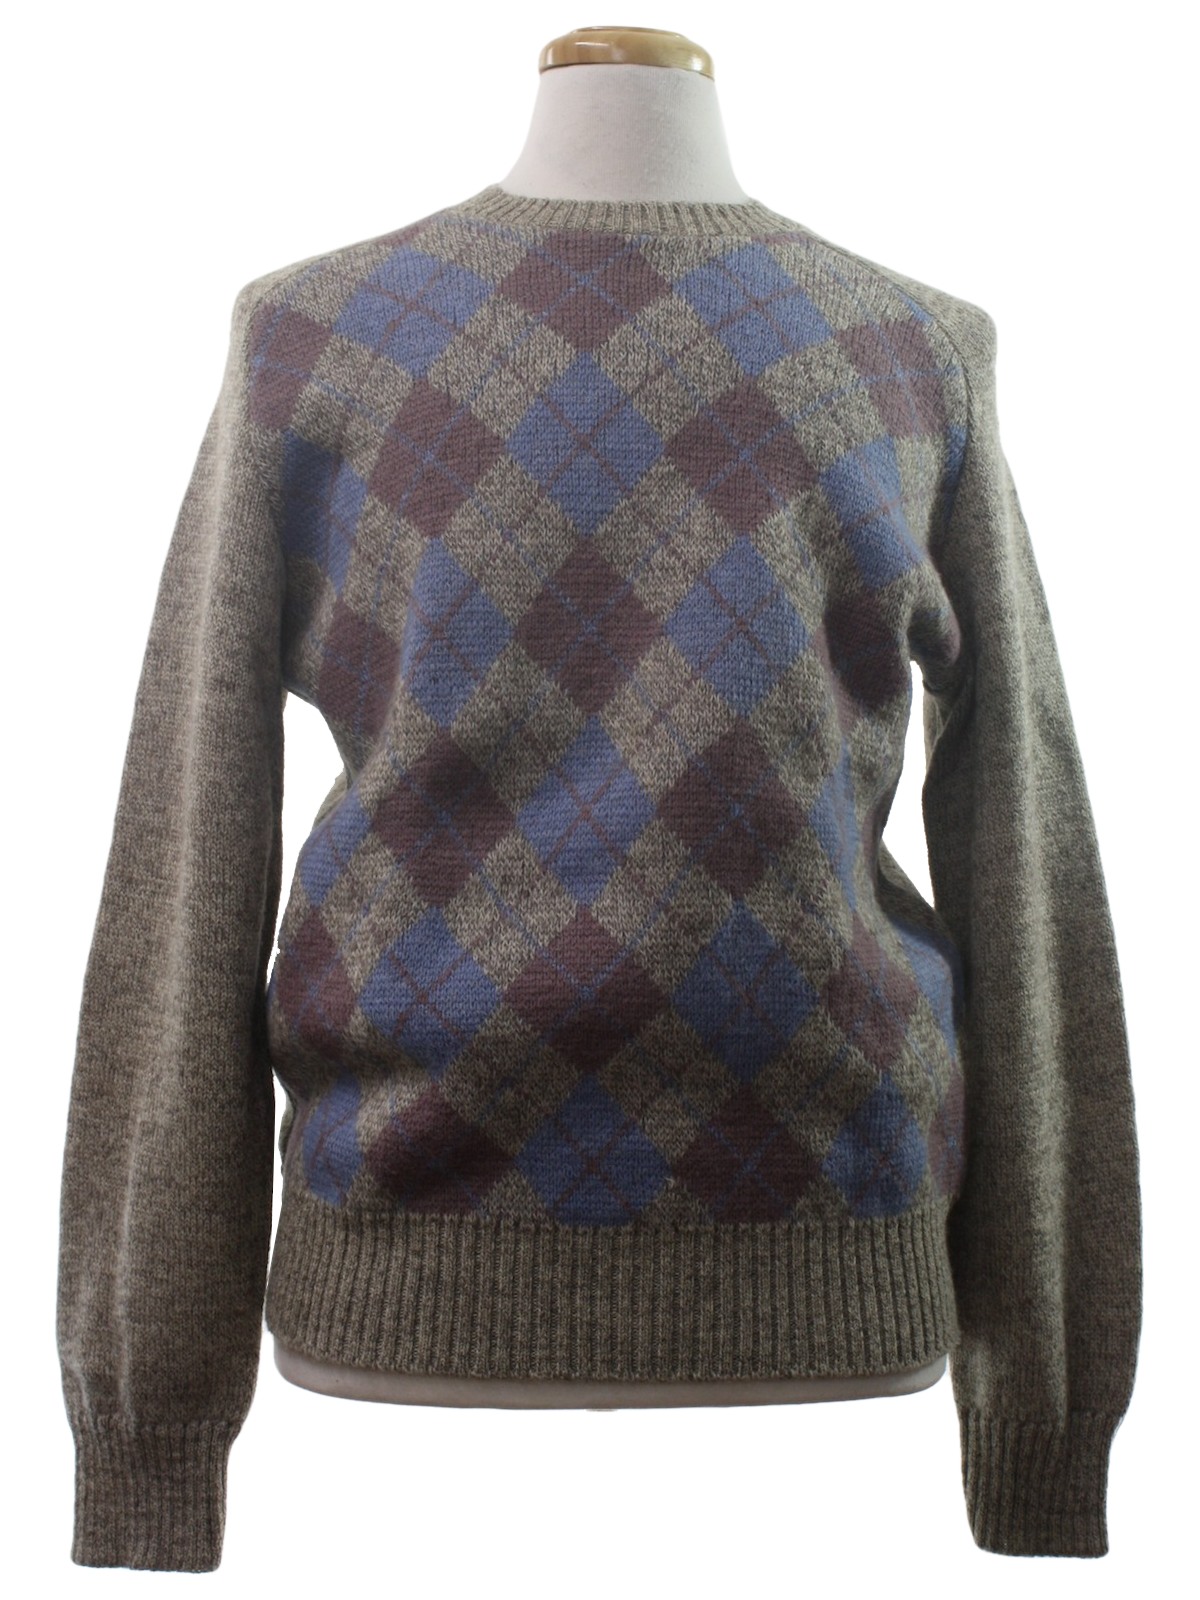 Vintage 1980's Sweater: 80s -Alps- Mens heathered brown and white ...